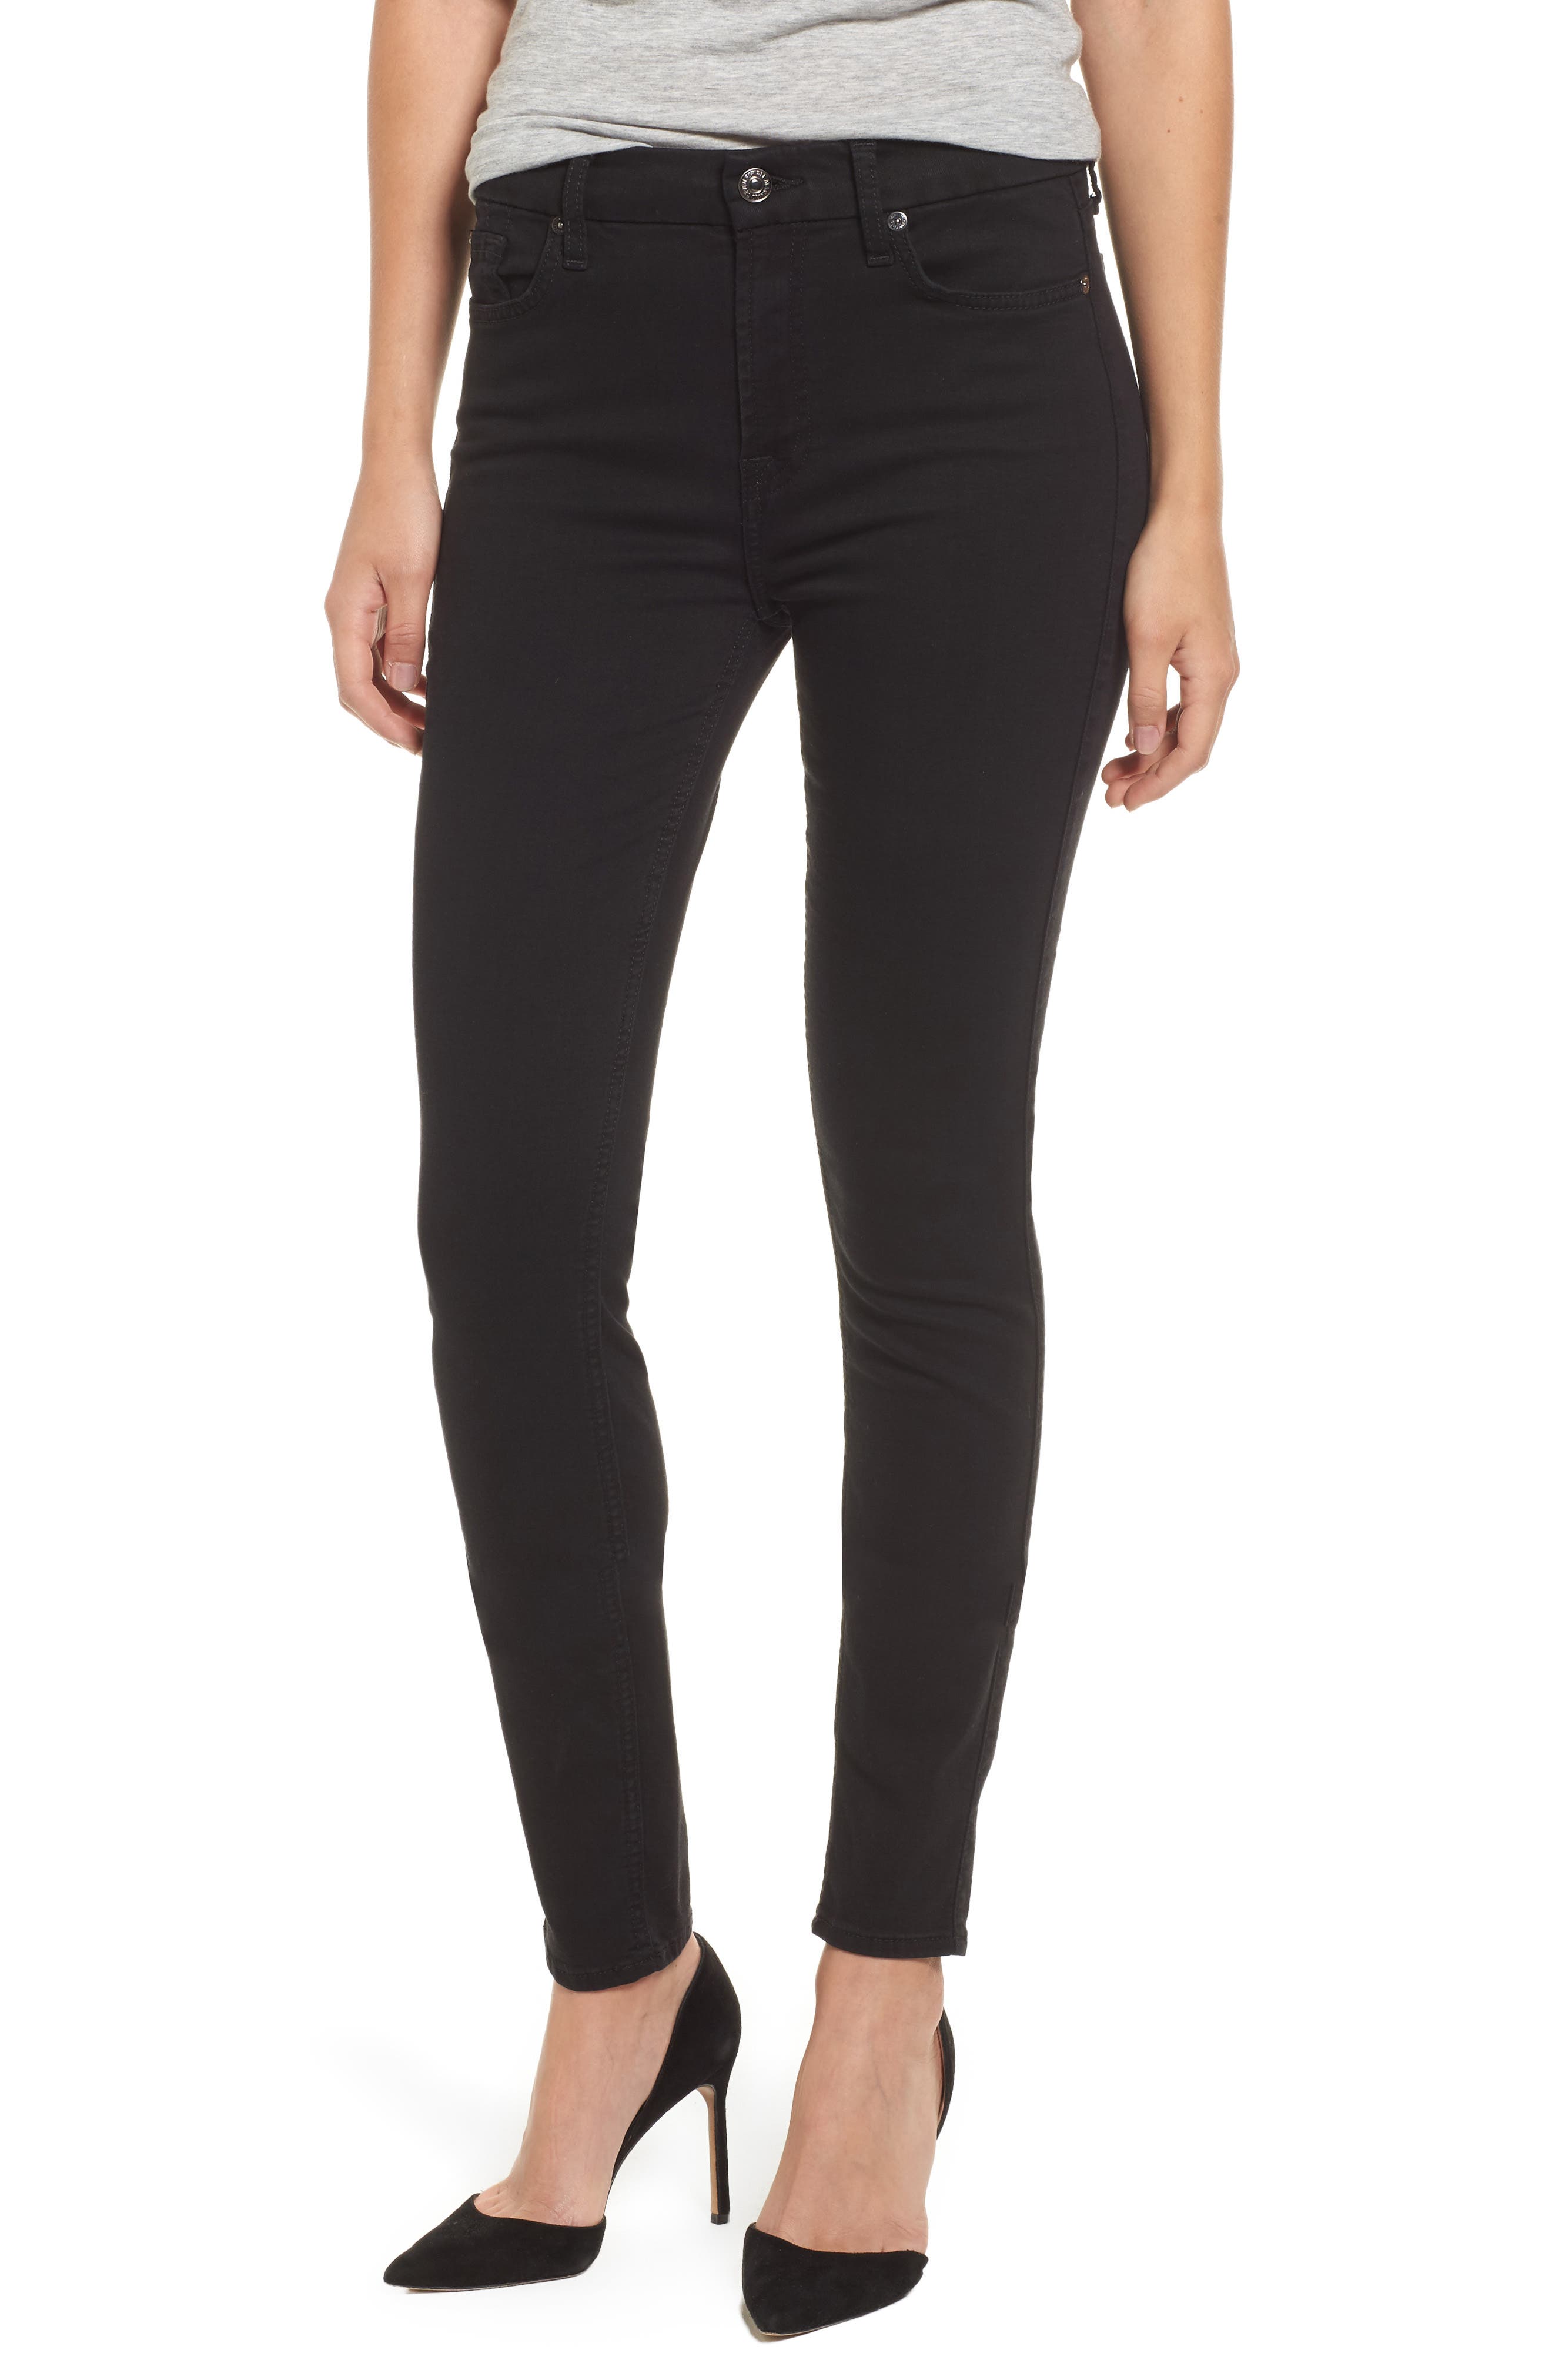 7 for all mankind high waist ankle skinny